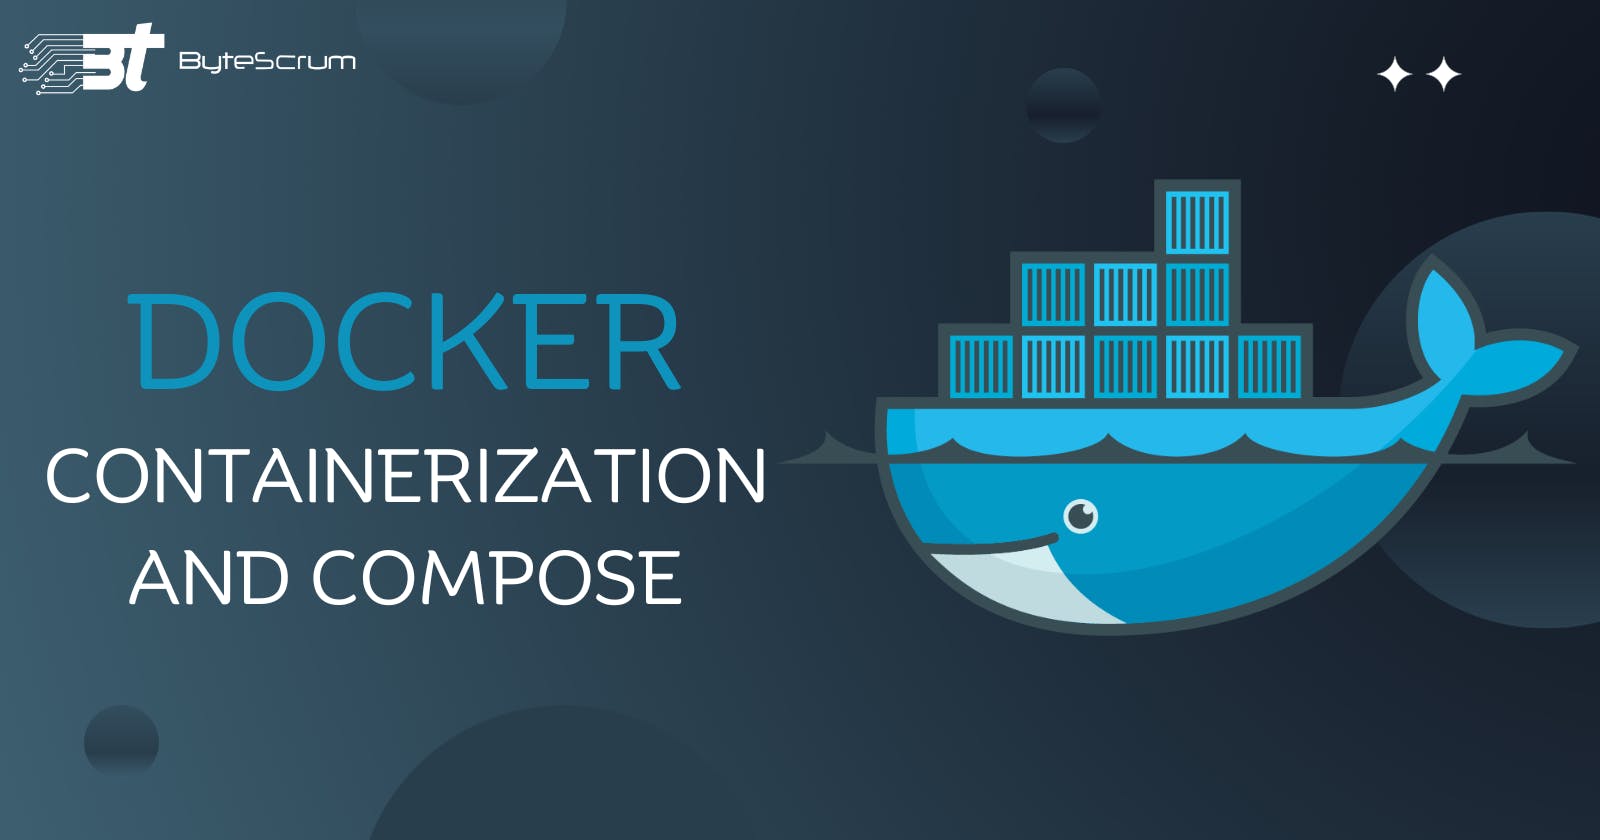 Docker Containerization and Compose